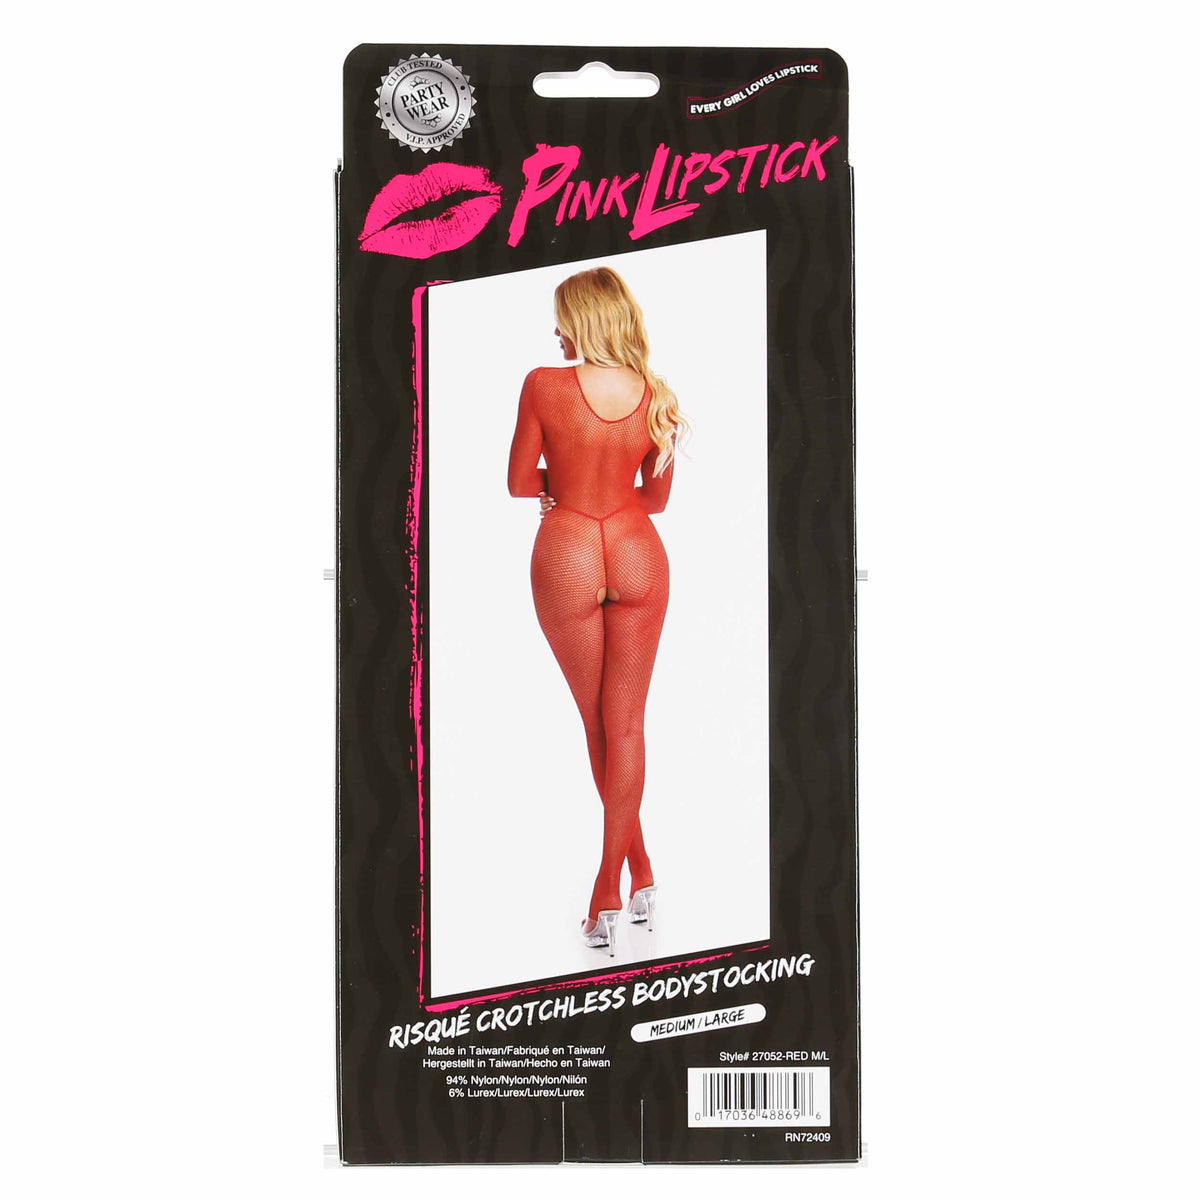 Pink Lipstick - Risque Crotchless Bodystocking - Red - M/L